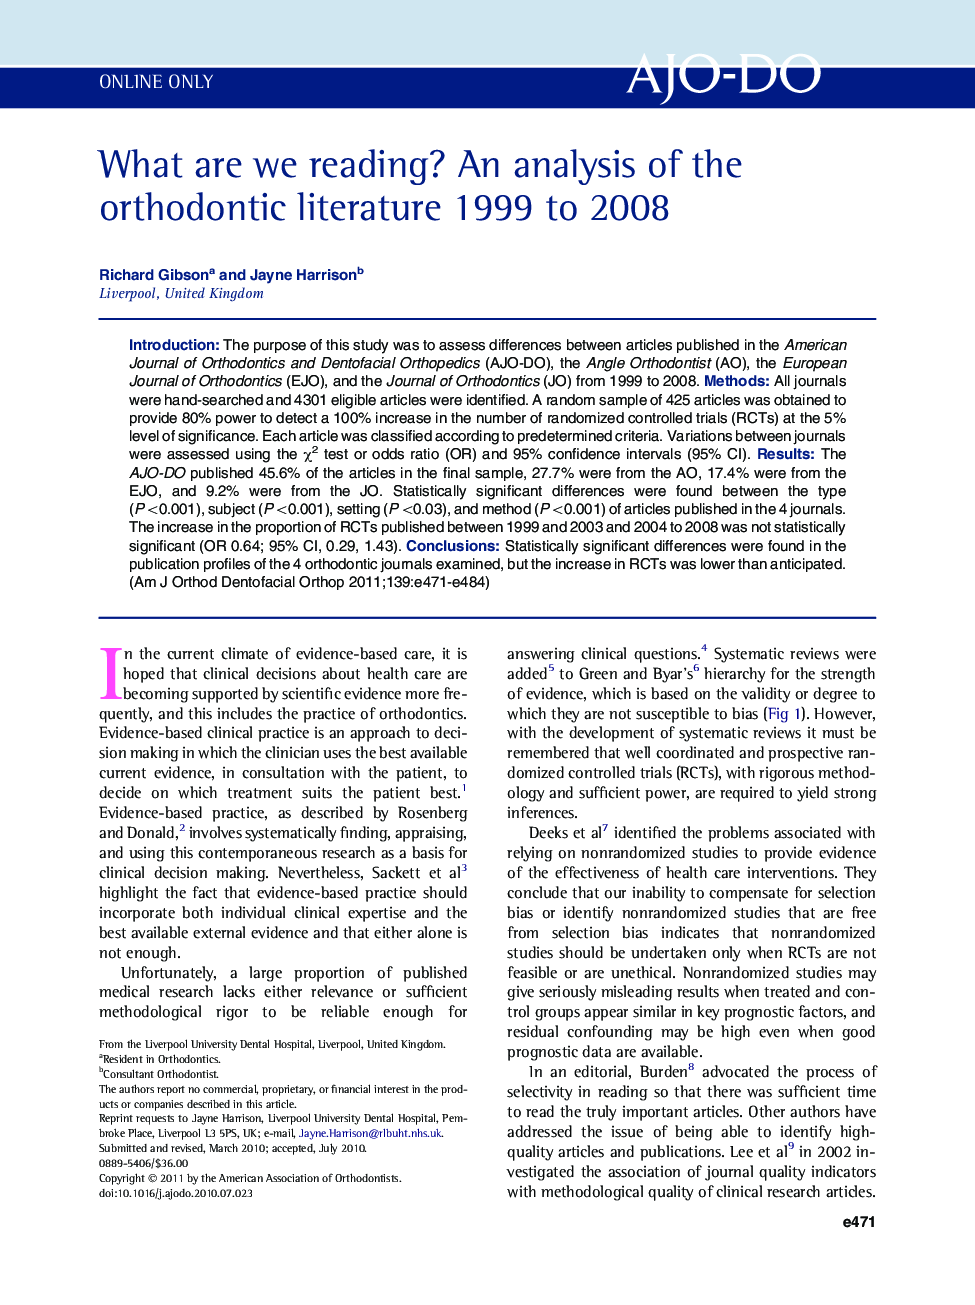 What are we reading? An analysis of the orthodontic literature 1999 to 2008 